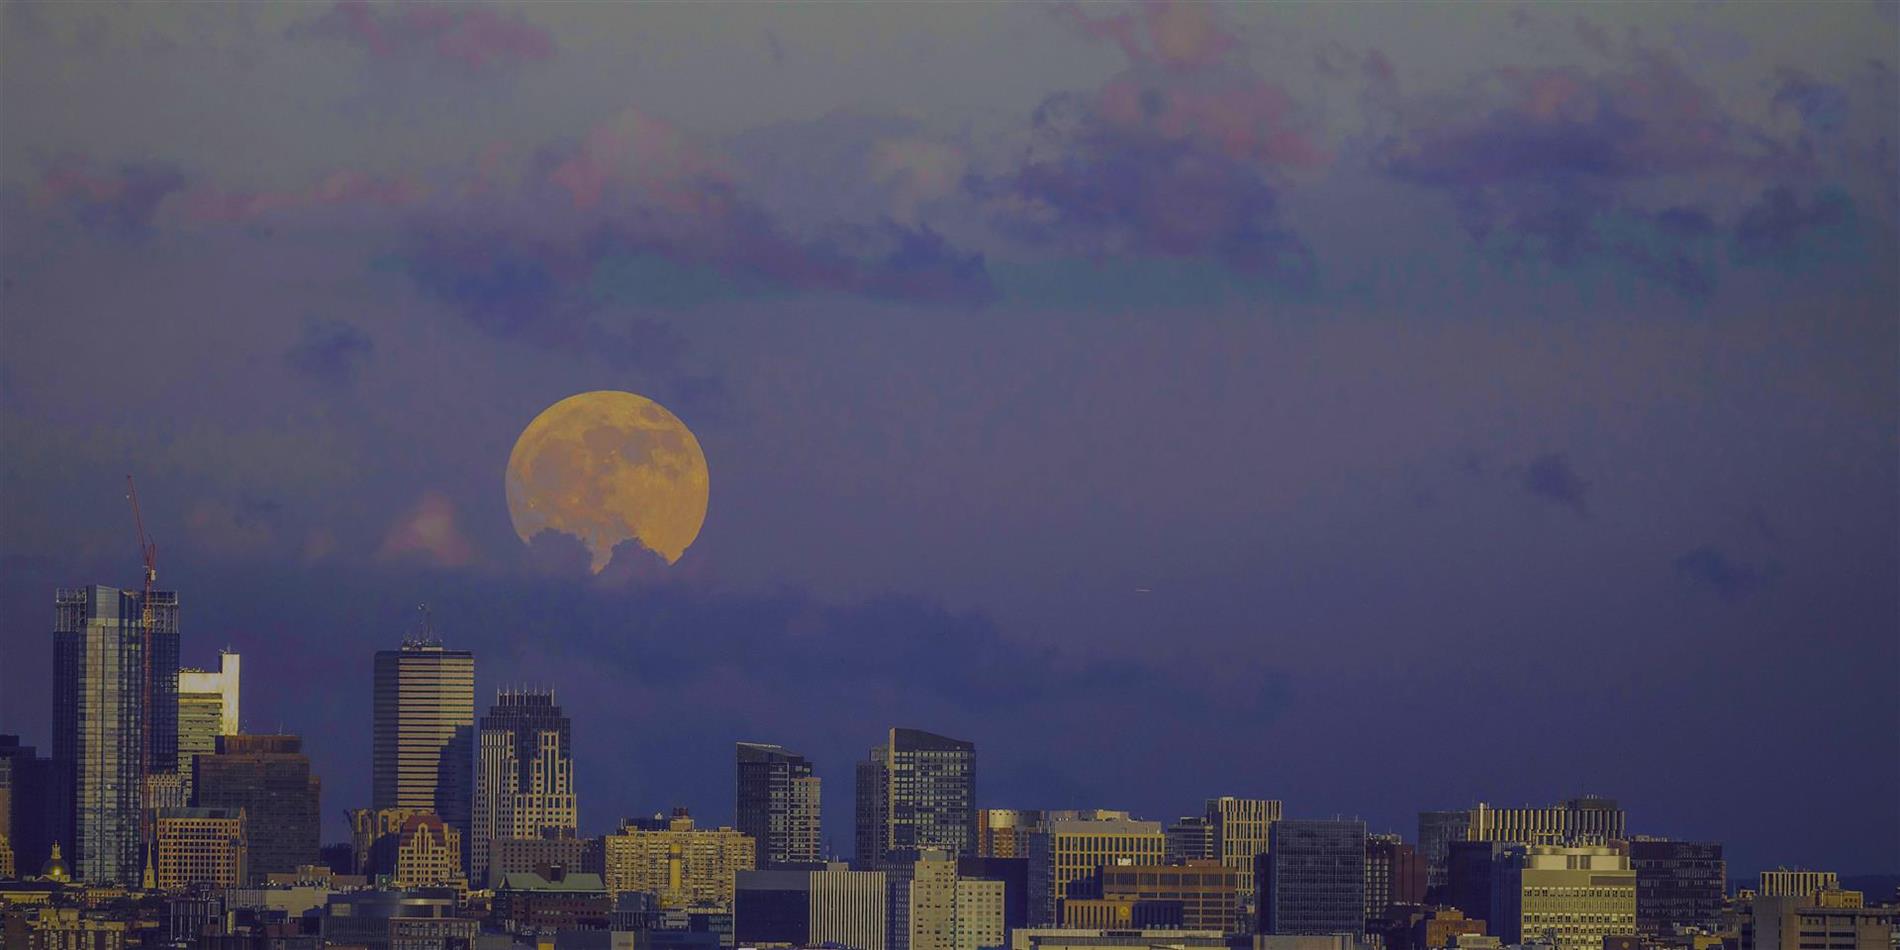 Moon Over Boston - Honorable Mention